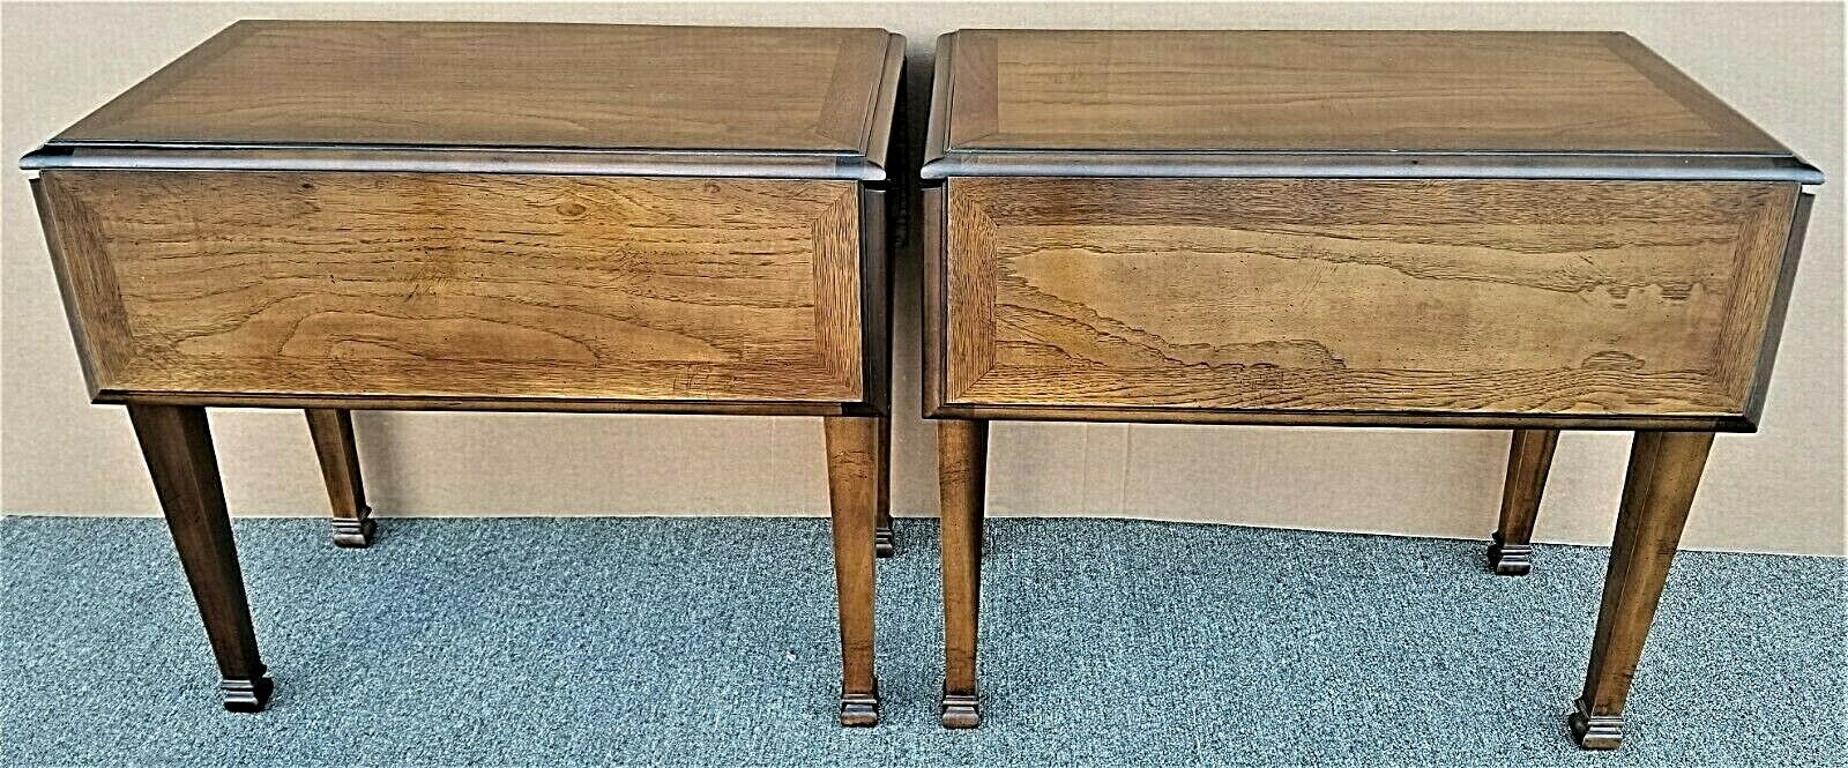 Late 20th Century Pembroke Drop-Leaf End Side Tables by Lane, Set of 2 For Sale